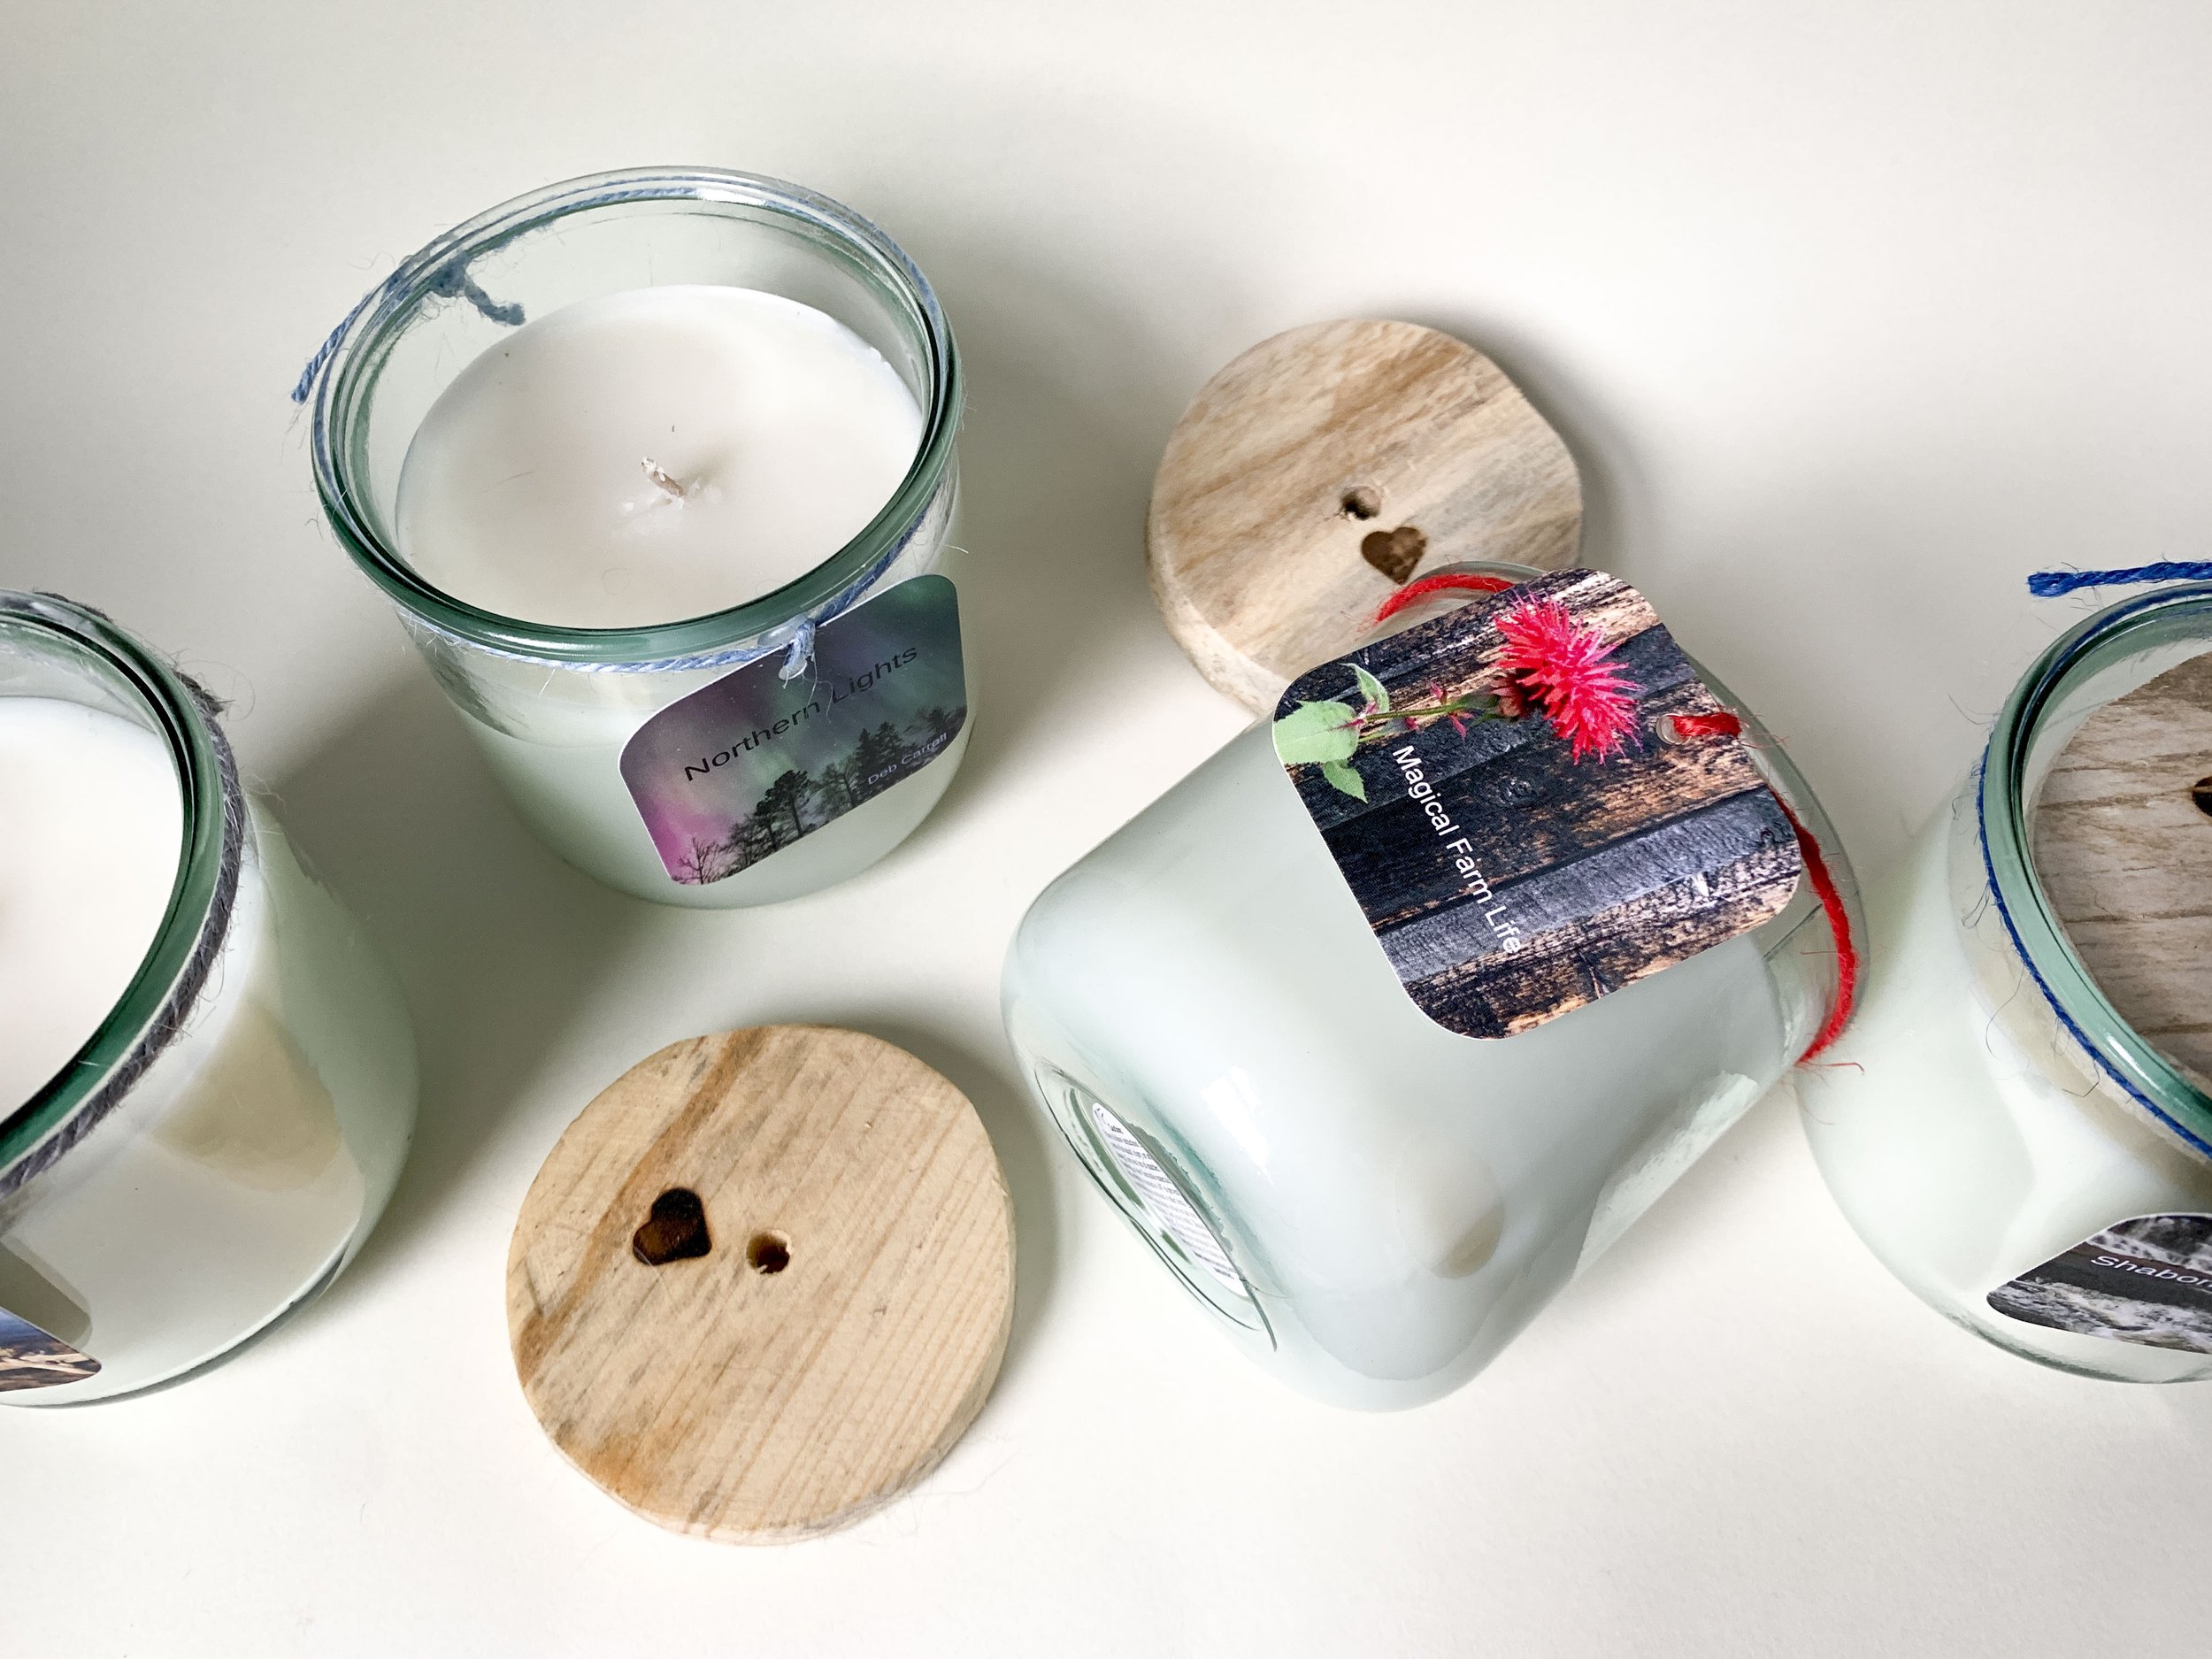 Four Hill Farm candles, one is lying on its side, two of the wooden lids are off and lying next to them.